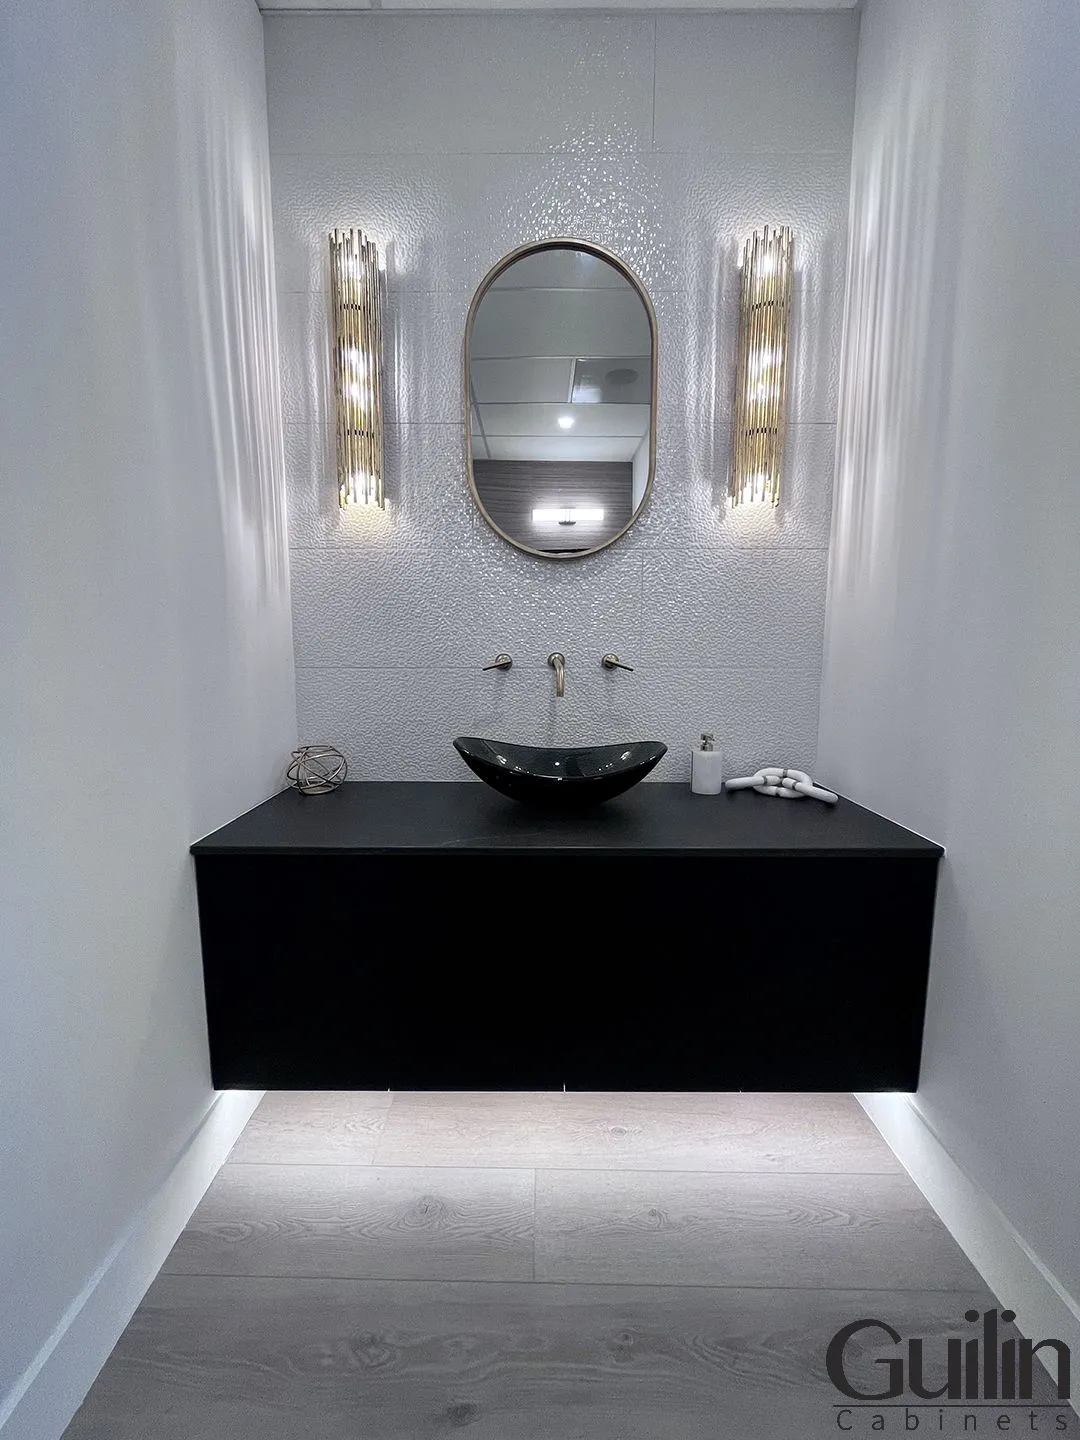 Floating Vanities with LED lighting - Guilin Cabinets Showrooms